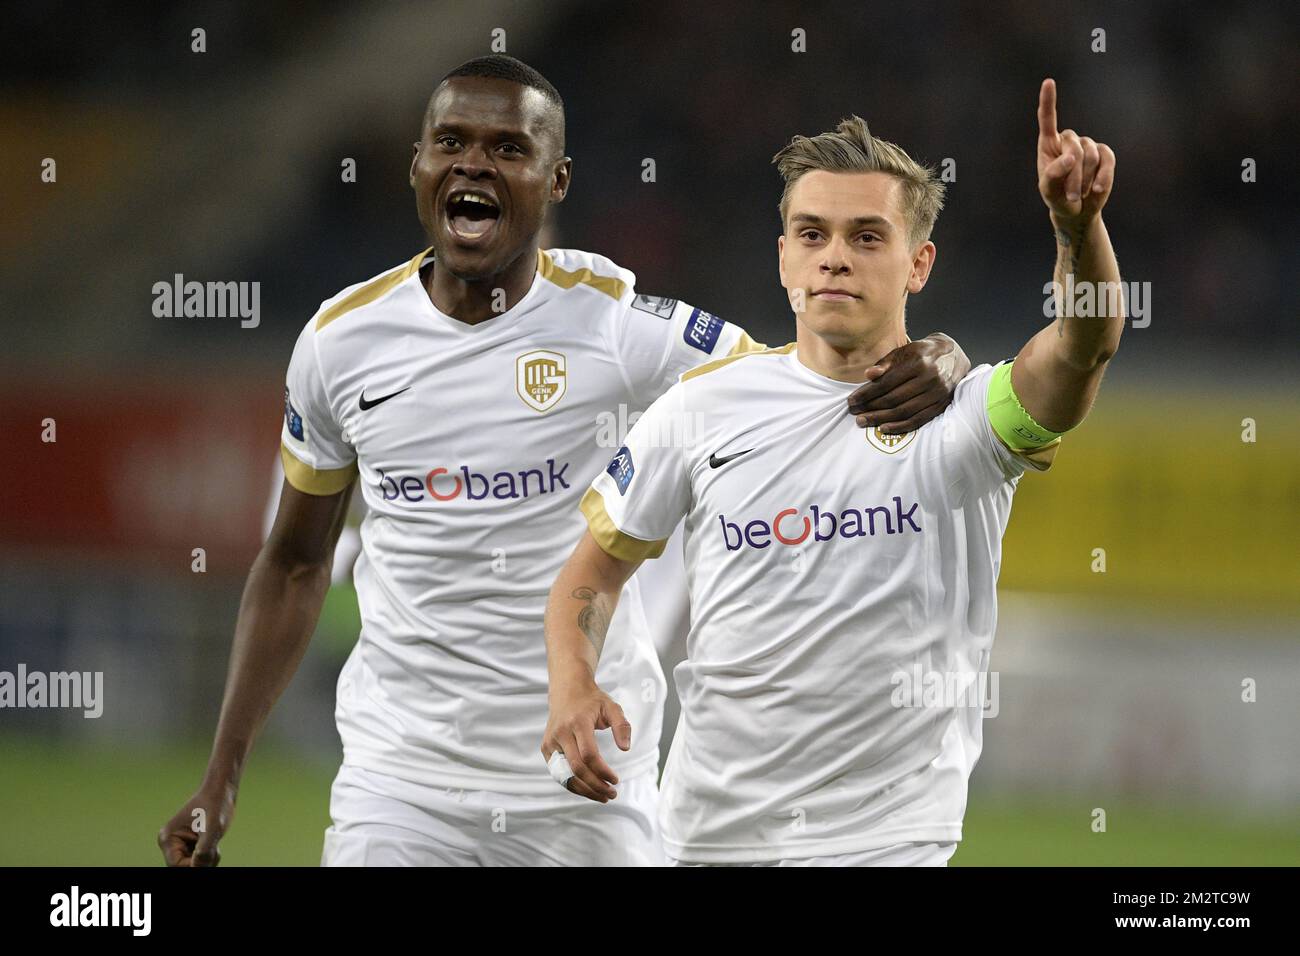 Genk's Leandro Trossard celebrates after scoring during a soccer match  between KAA Gent and KRC Genk, Saturday 27 April 2019 in Gent, on day 6 (out  of 10) of the Play-off 1